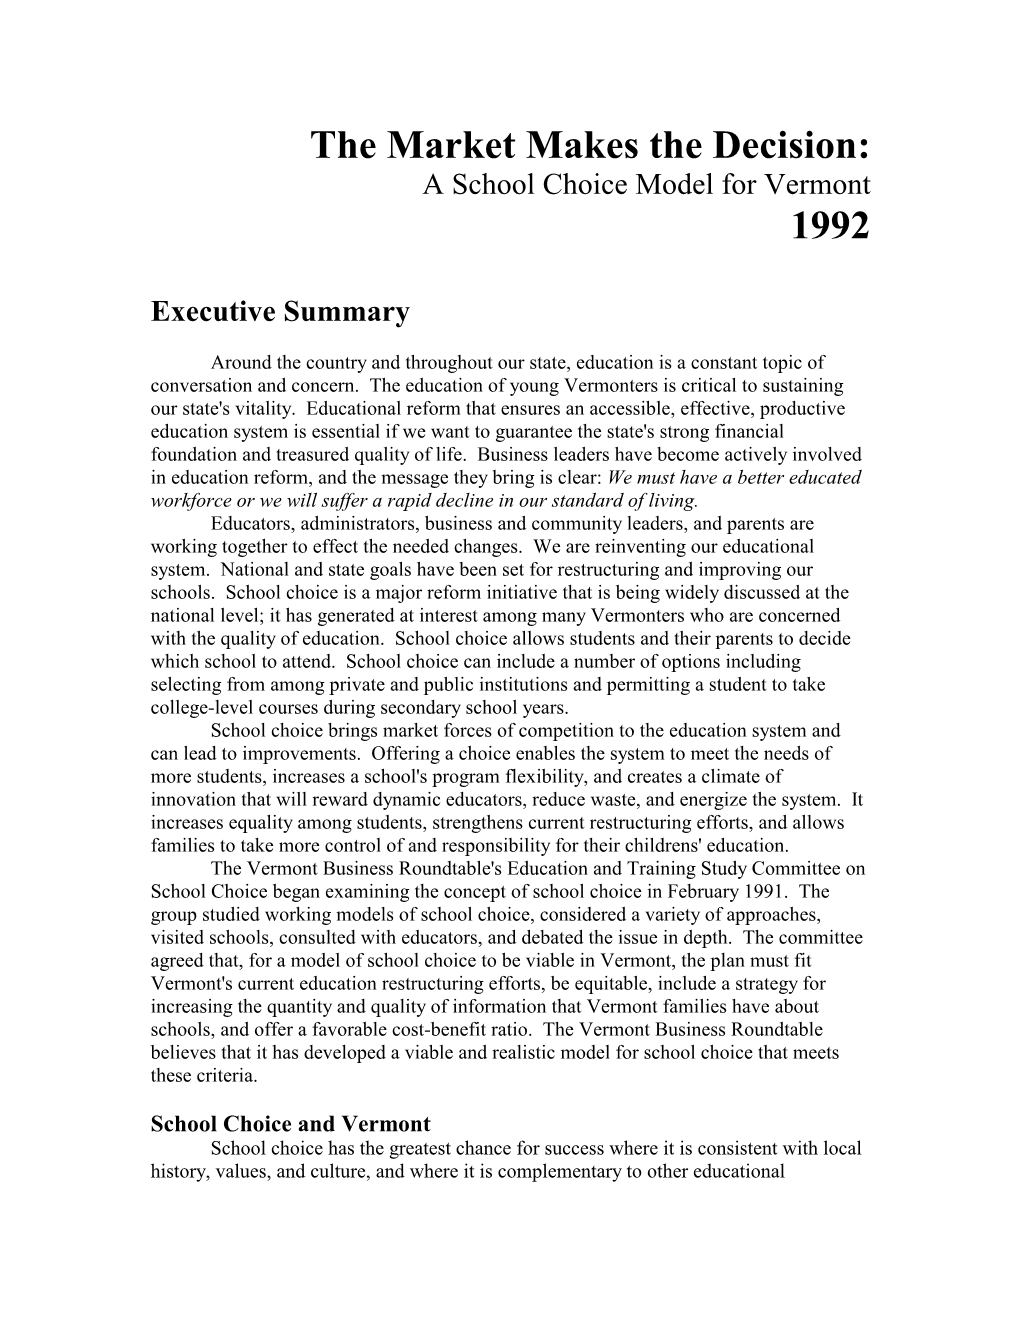 The Market Makes the Decision: a School Choice Model for Vermont 1992